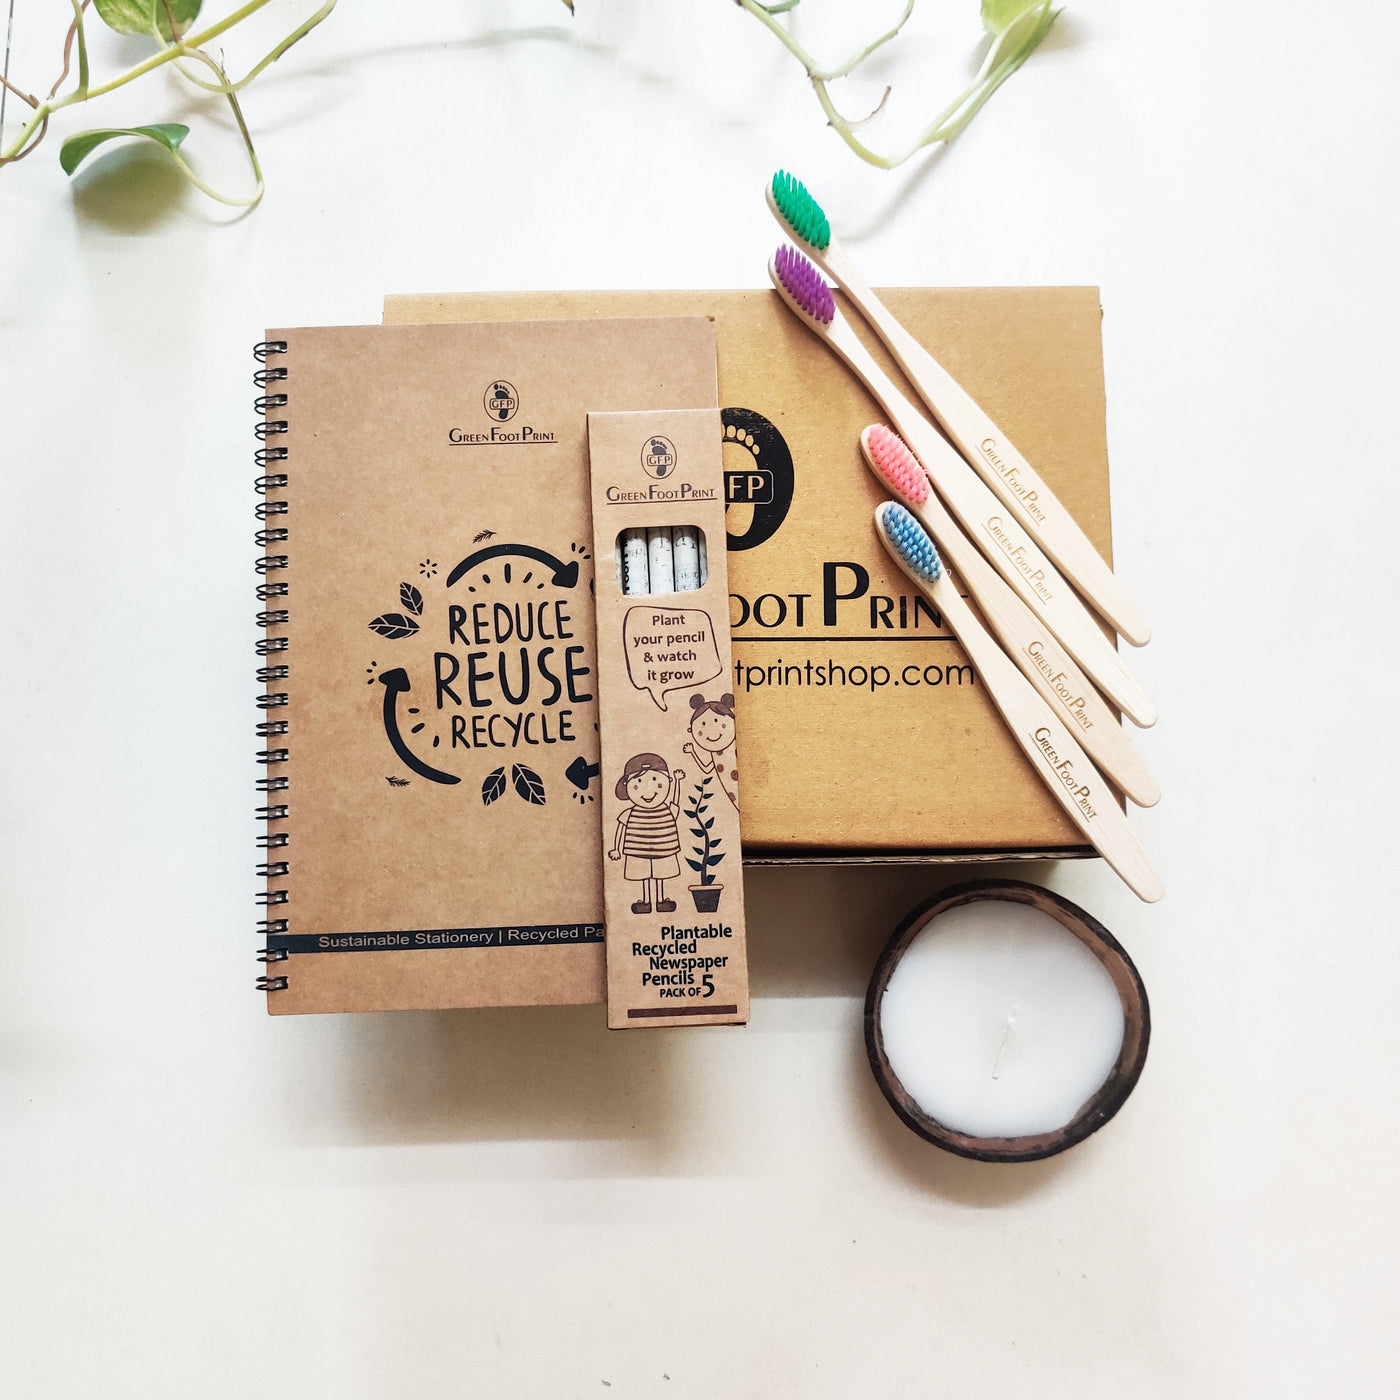 Eco Friendly Personal Care & Stationery Gift Box - Suspire